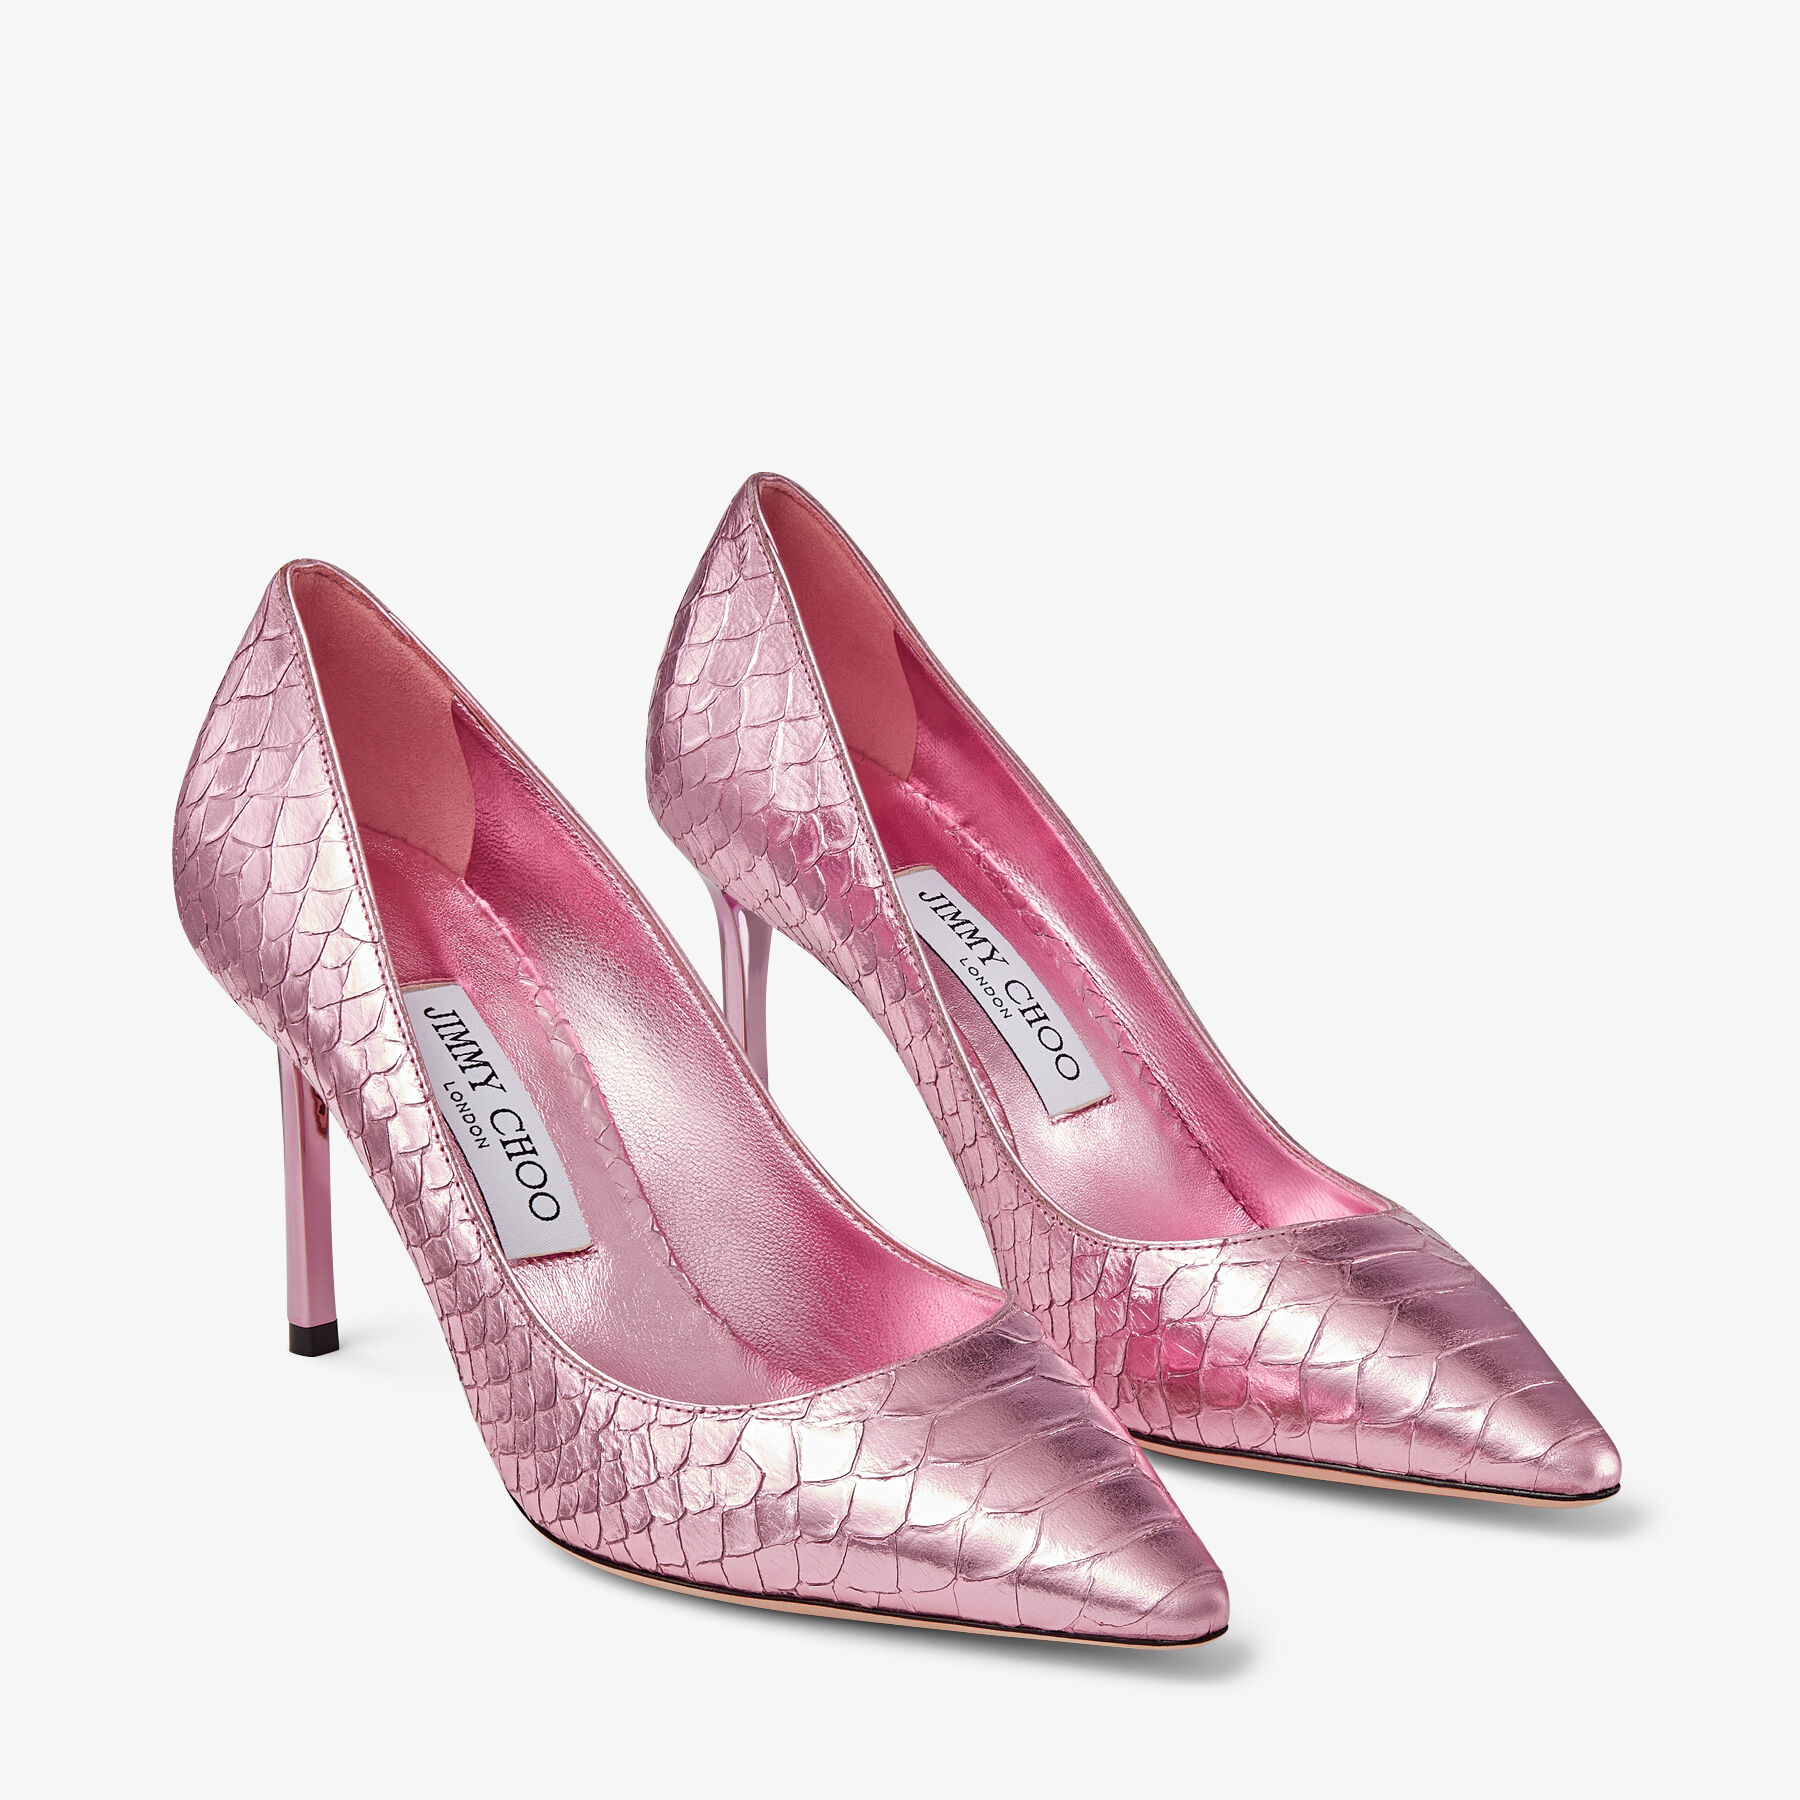 Romy 85 | Candy Pink Metallic Snake Printed Leather Pumps | JIMMY 